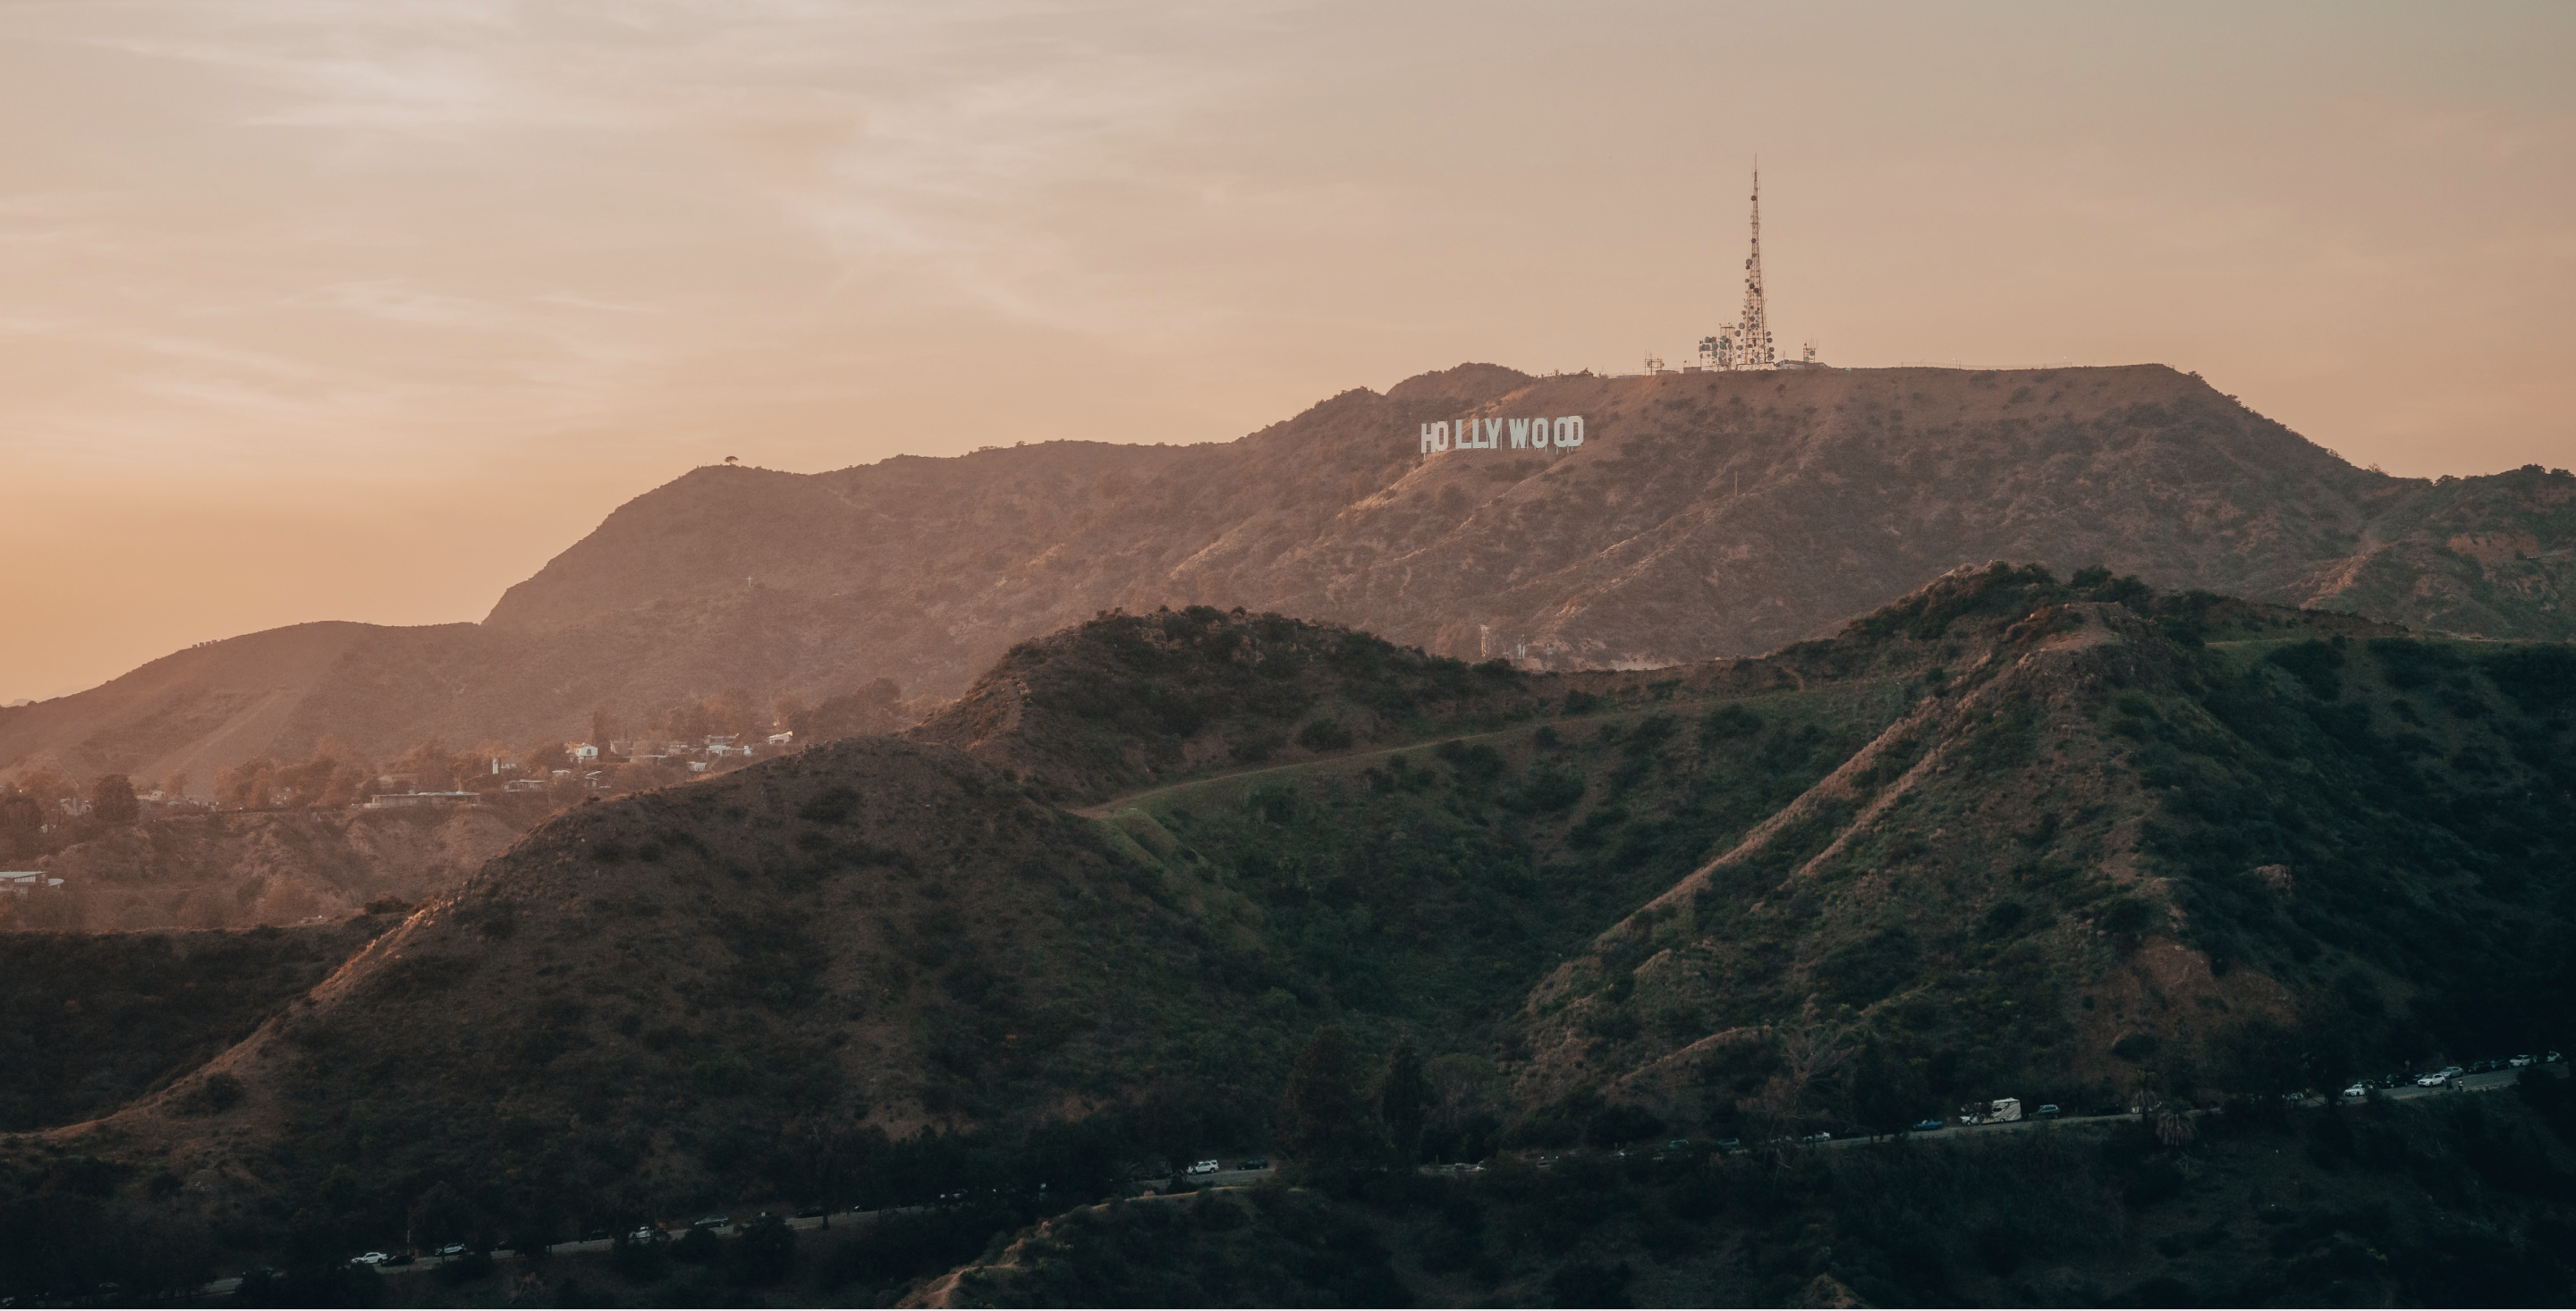 Views of the Hollywood Hills and the Hollywood sign